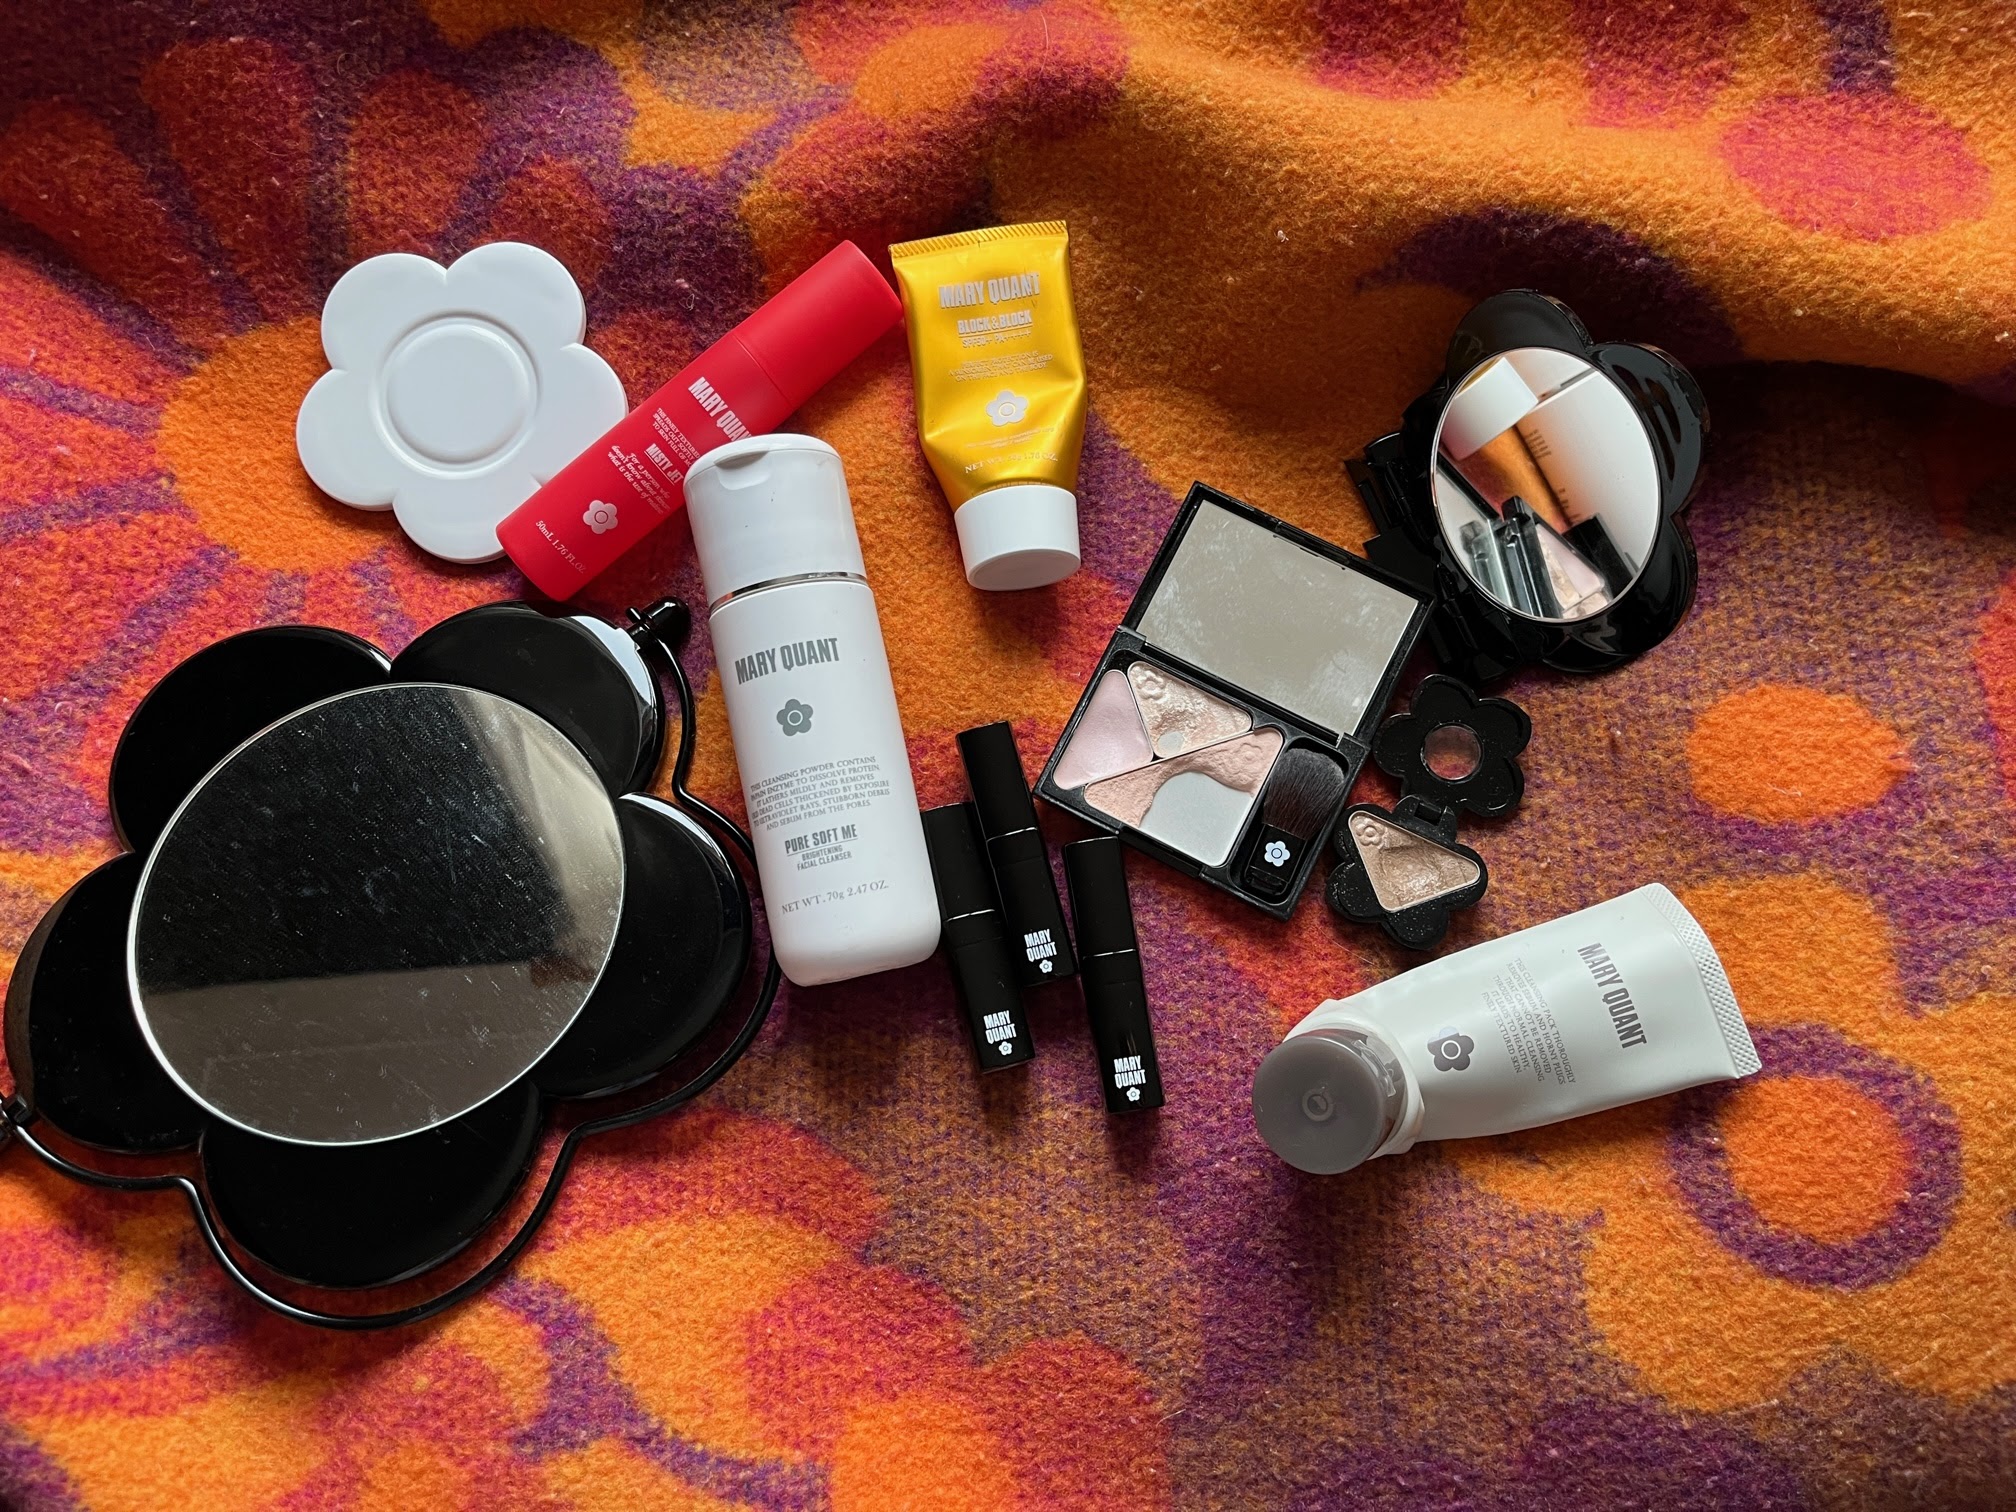 A flatlay of Mary Quant makeup and skincare including mirrors, lipsticks, suncream and skincare.